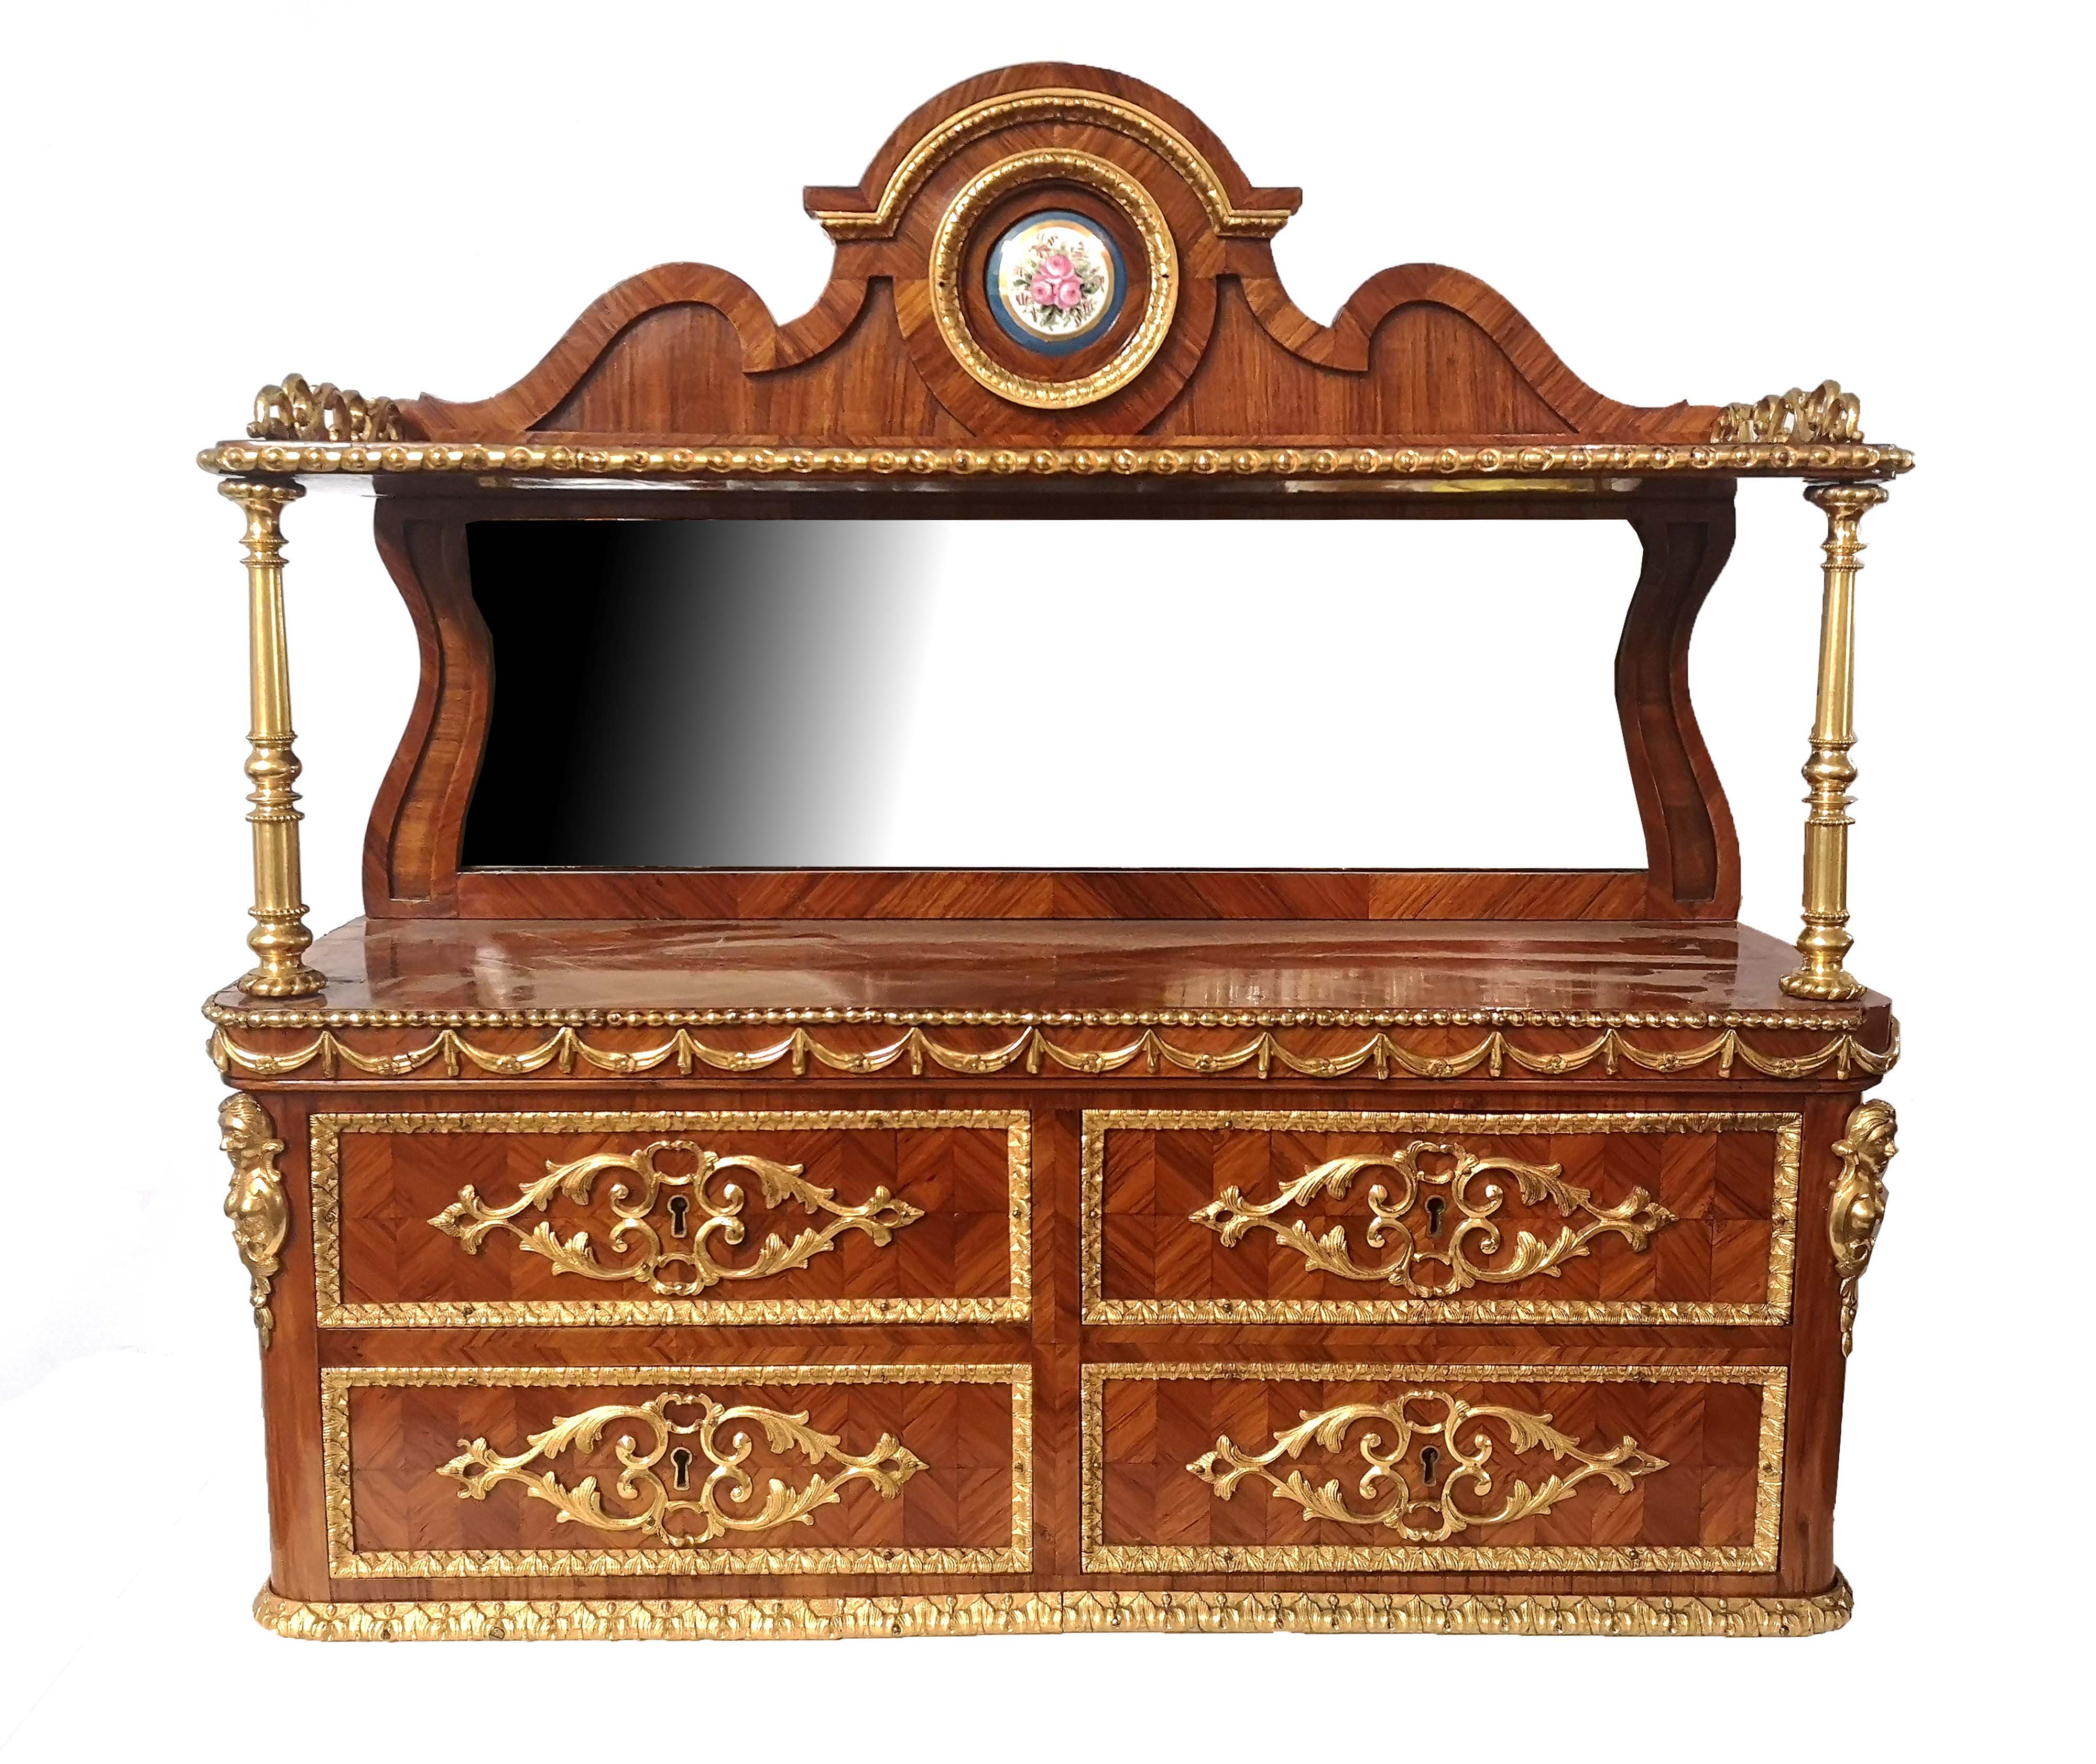 IN THE MANNER OF LINK, A 19TH CENTURY HERRING BONE, WALNUT AND ORMOLU WALL MOUNTED CABINET With